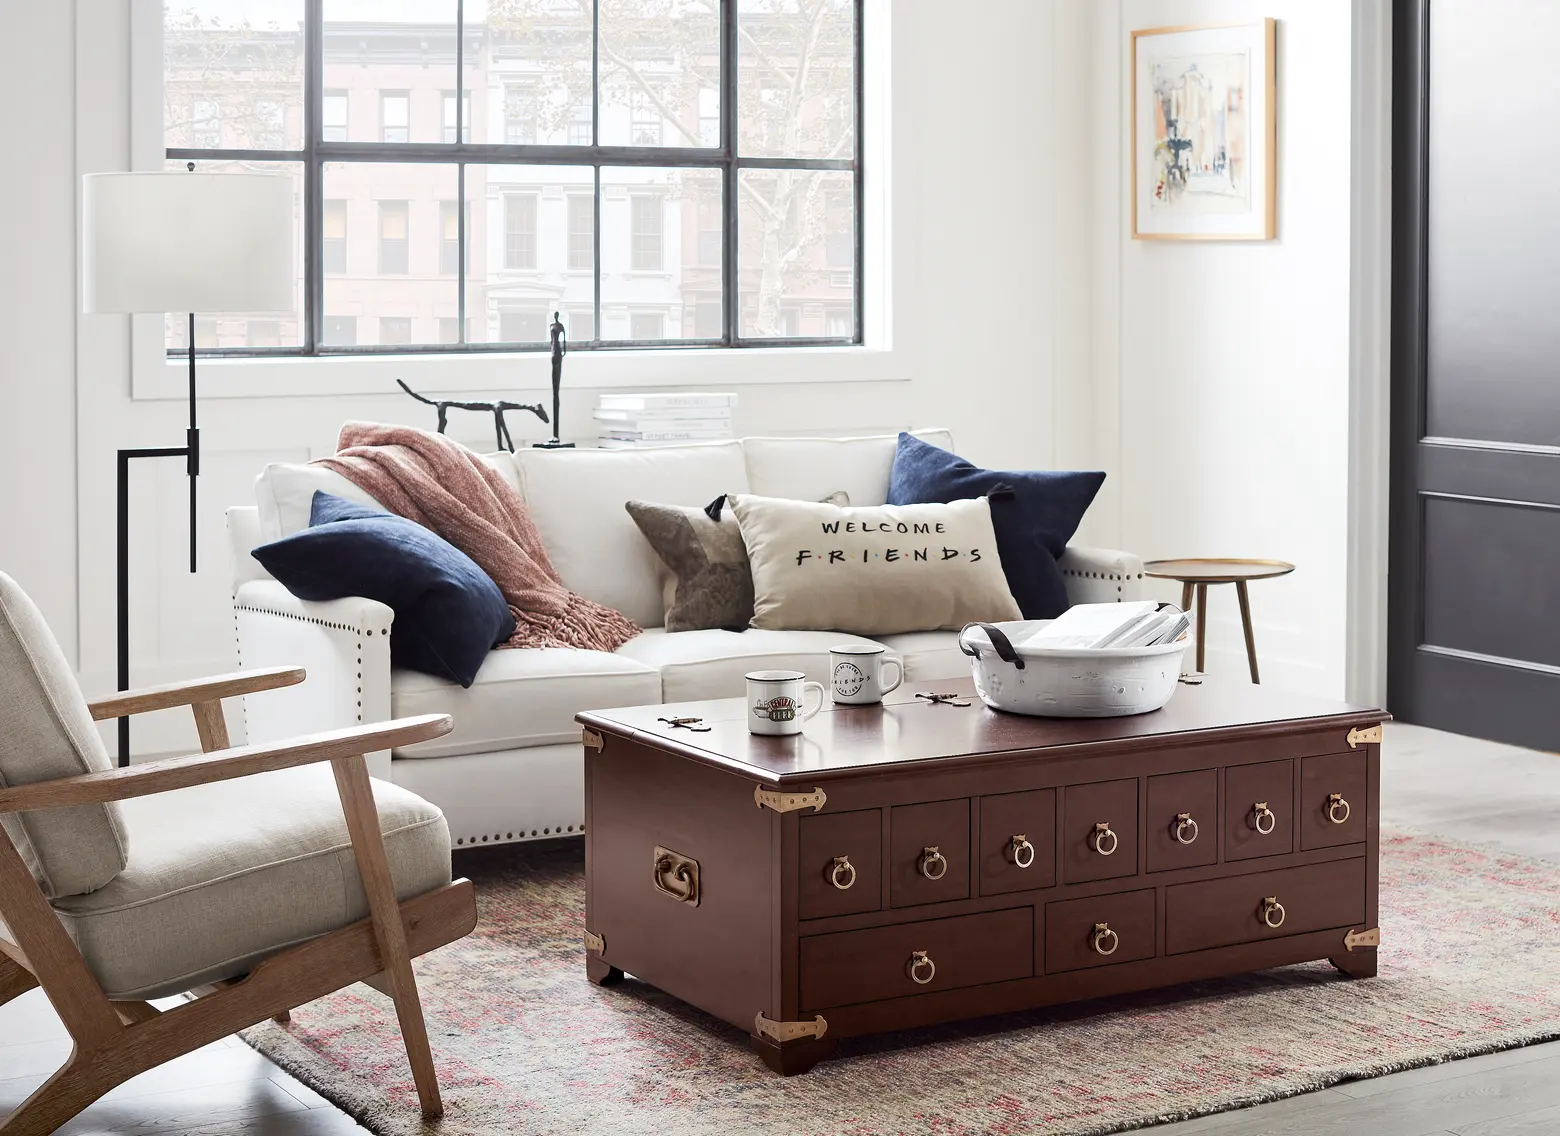 Pottery Barn’s new ‘Friends’ collection will be there for you…and your apartment